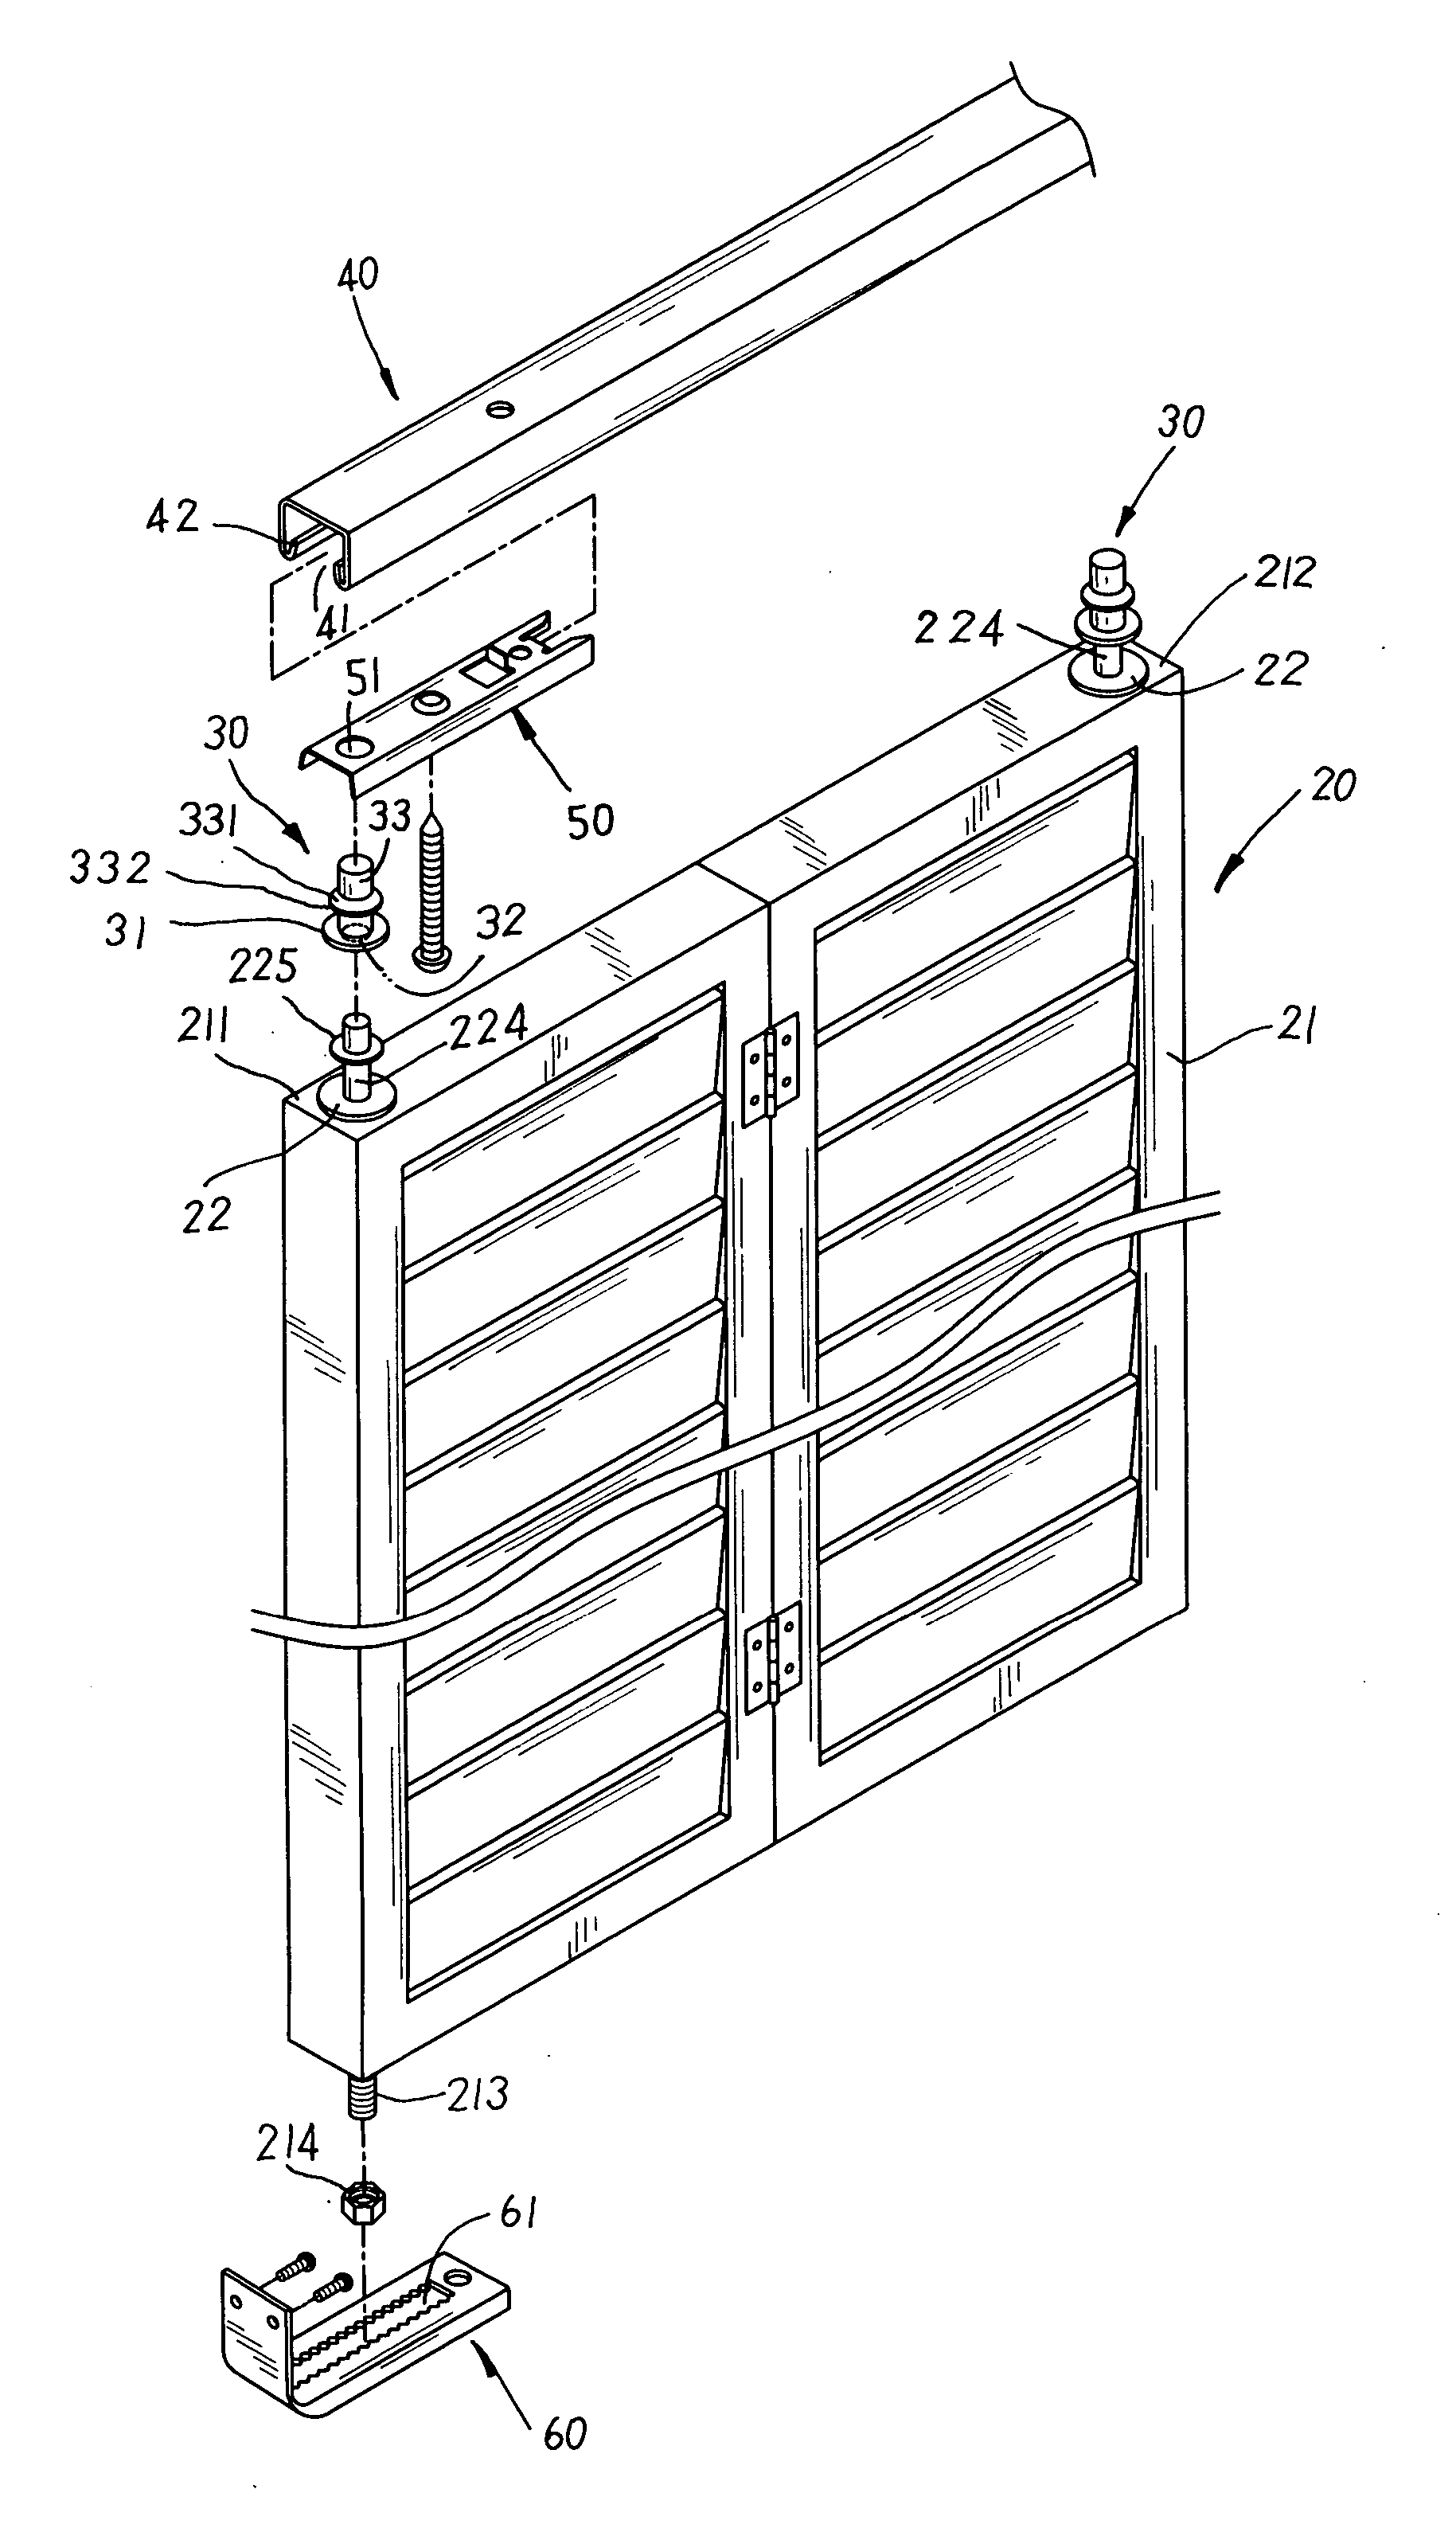 Supporting gear structure for retractable folding doors